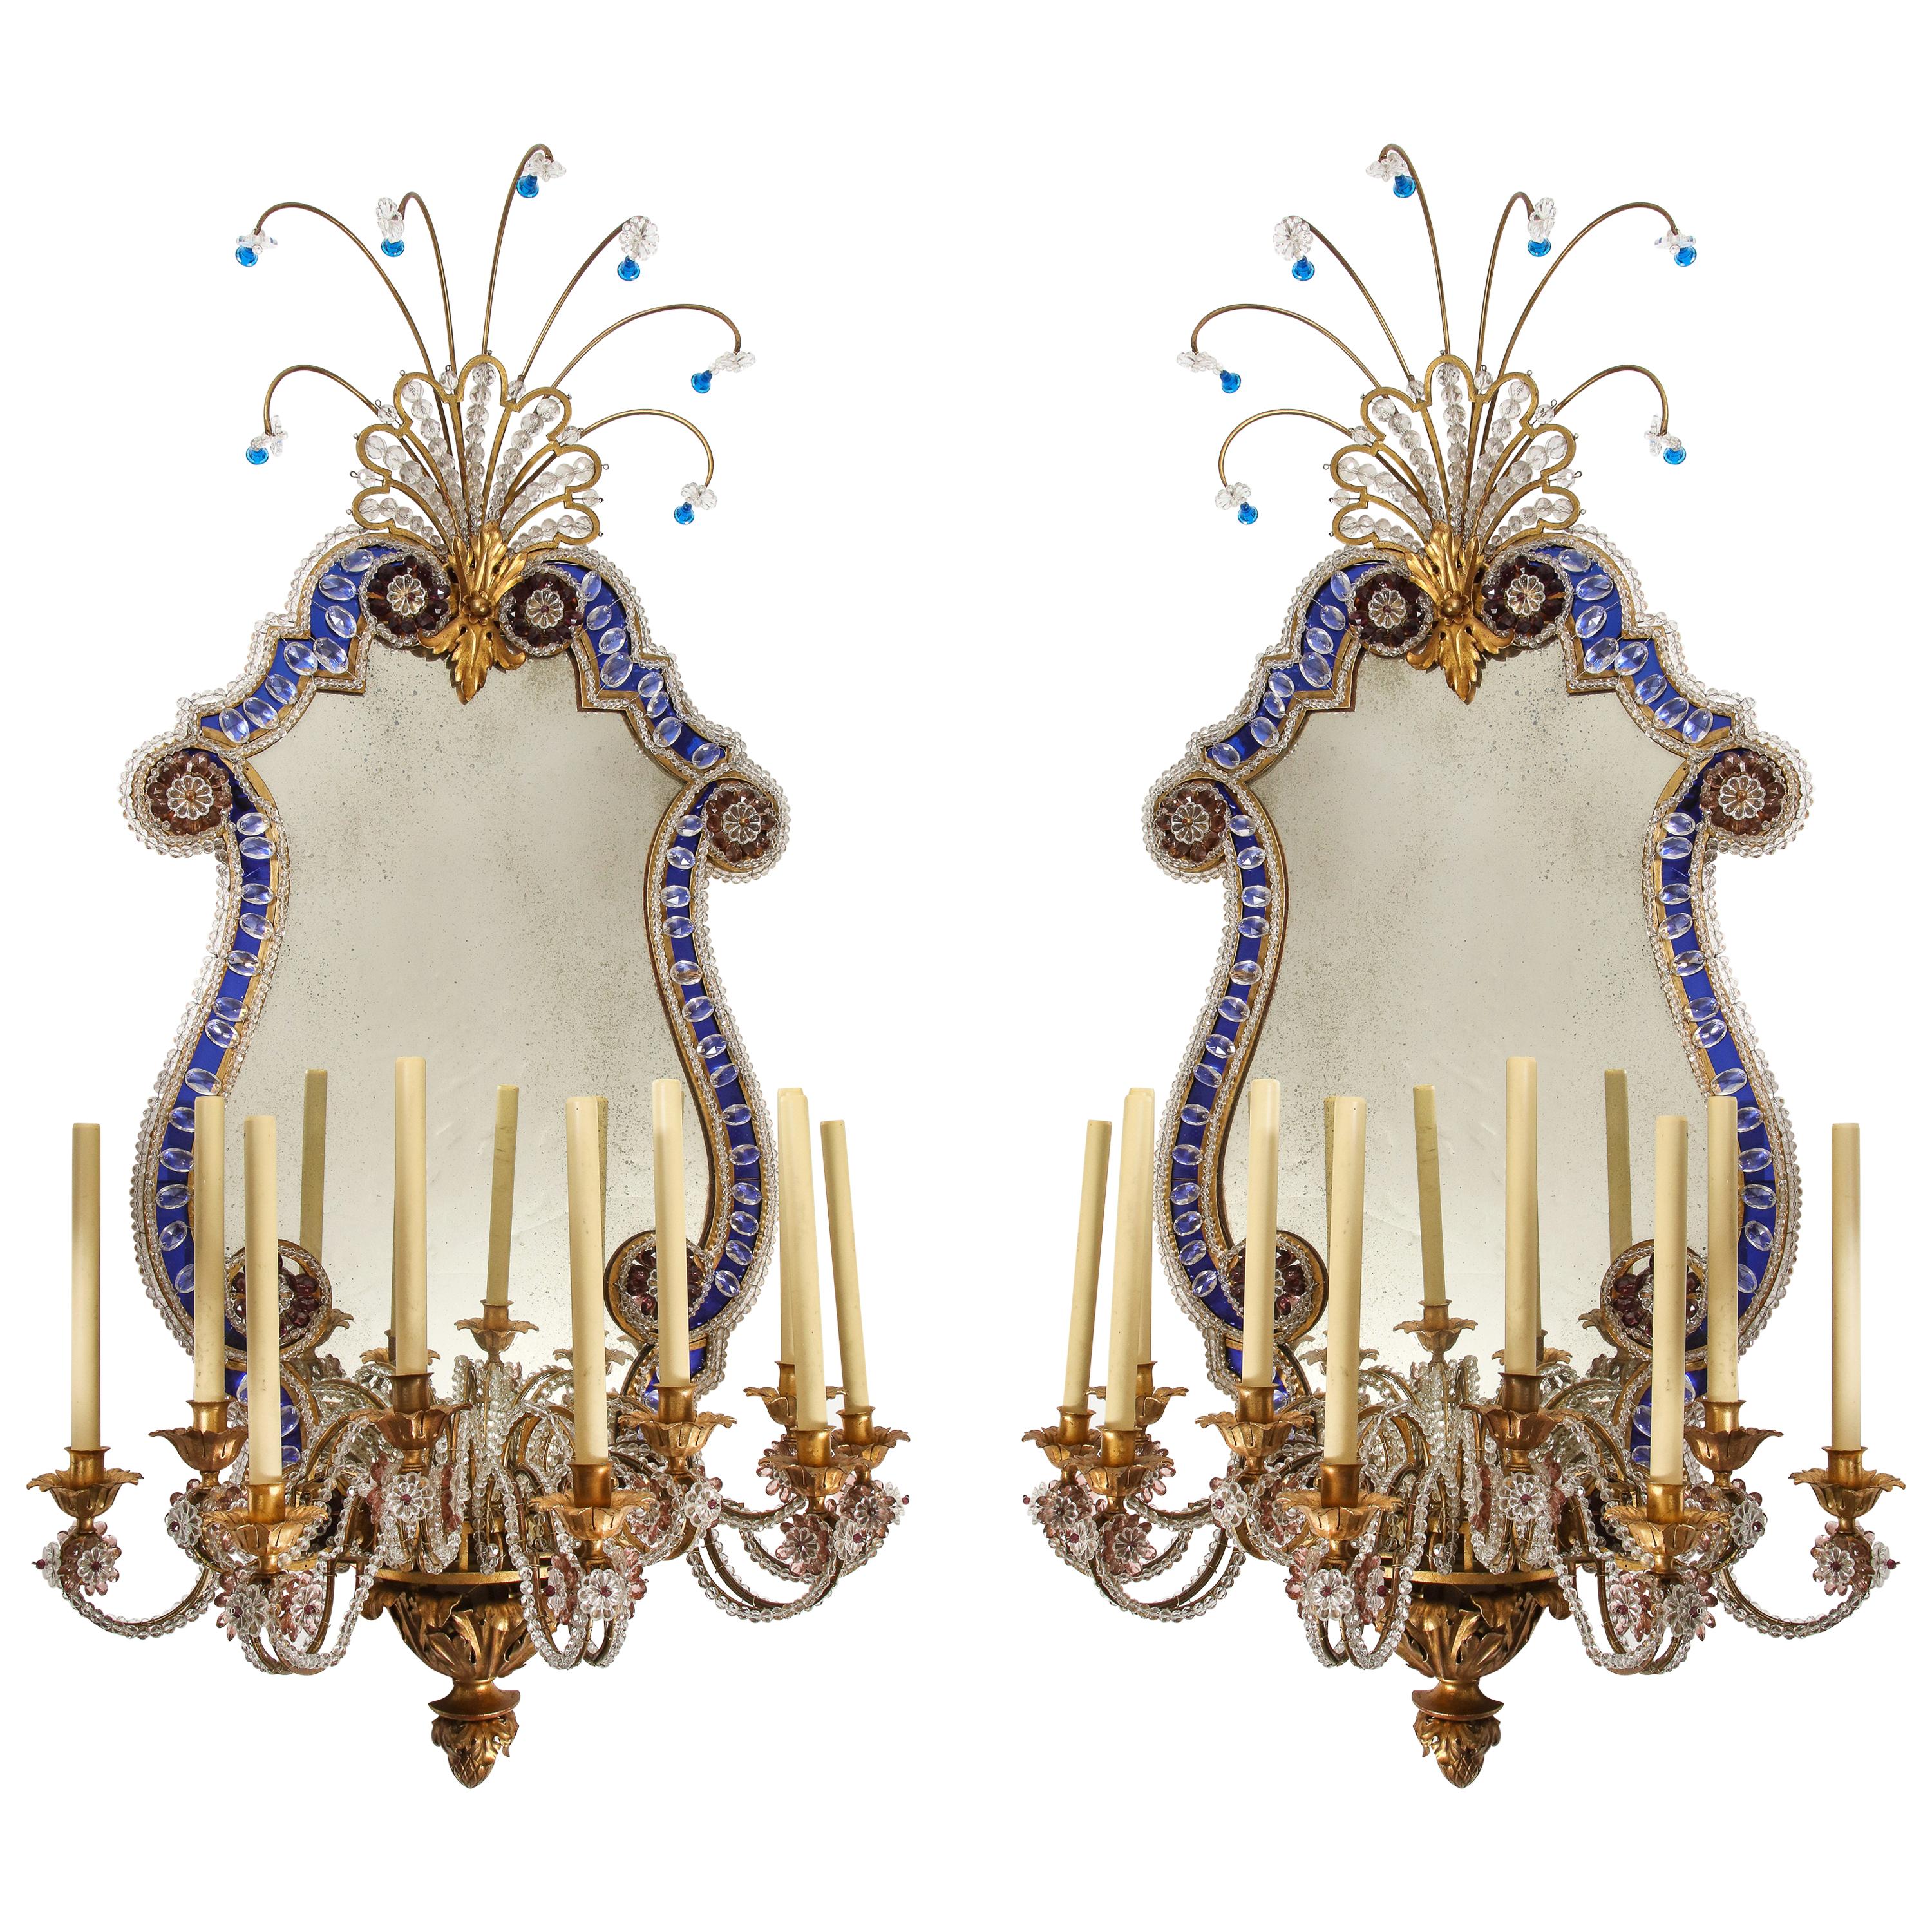 Pr French 20th C Dore Bronze Mnt Mirrored & Beaded Crystal 9-Arm Sconces